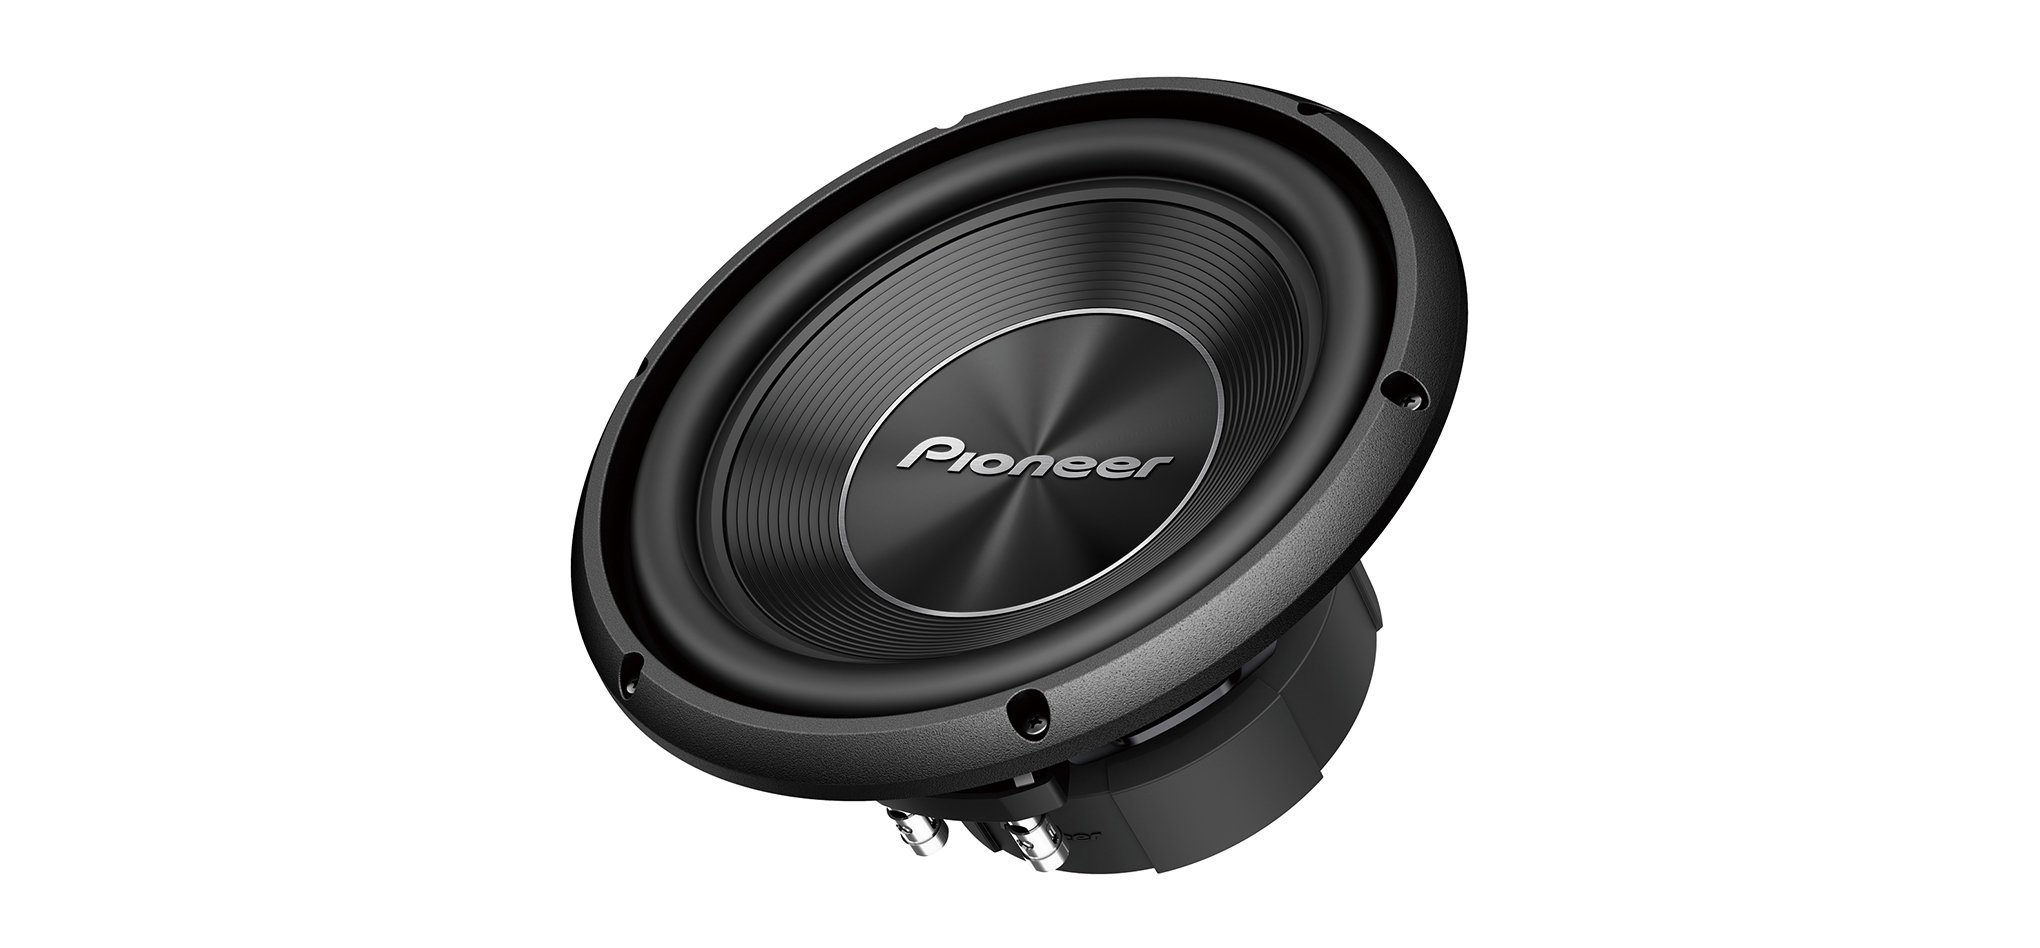 Subwoofer of the highest class